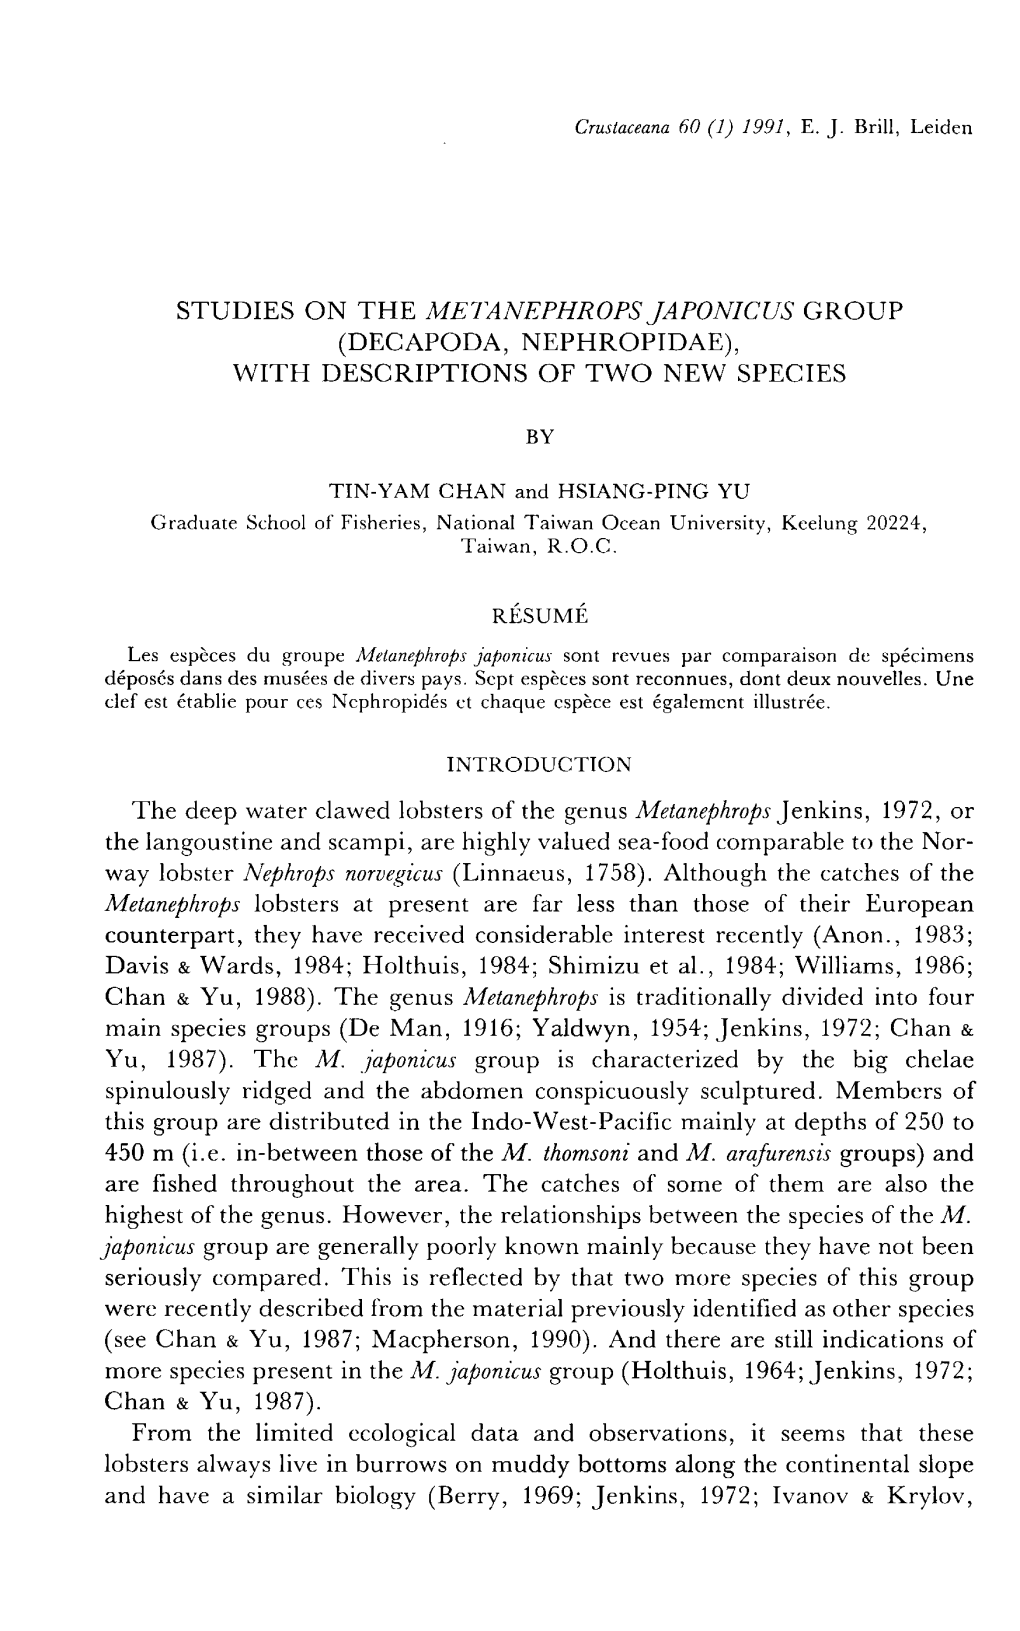 STUDIES on the METANEPHROPS JAPONICUS GROUP (DECAPODA, NEPHROPIDAE), with DESCRIPTIONS of TWO NEW SPECIES by TIN-YAM CHAN and HS